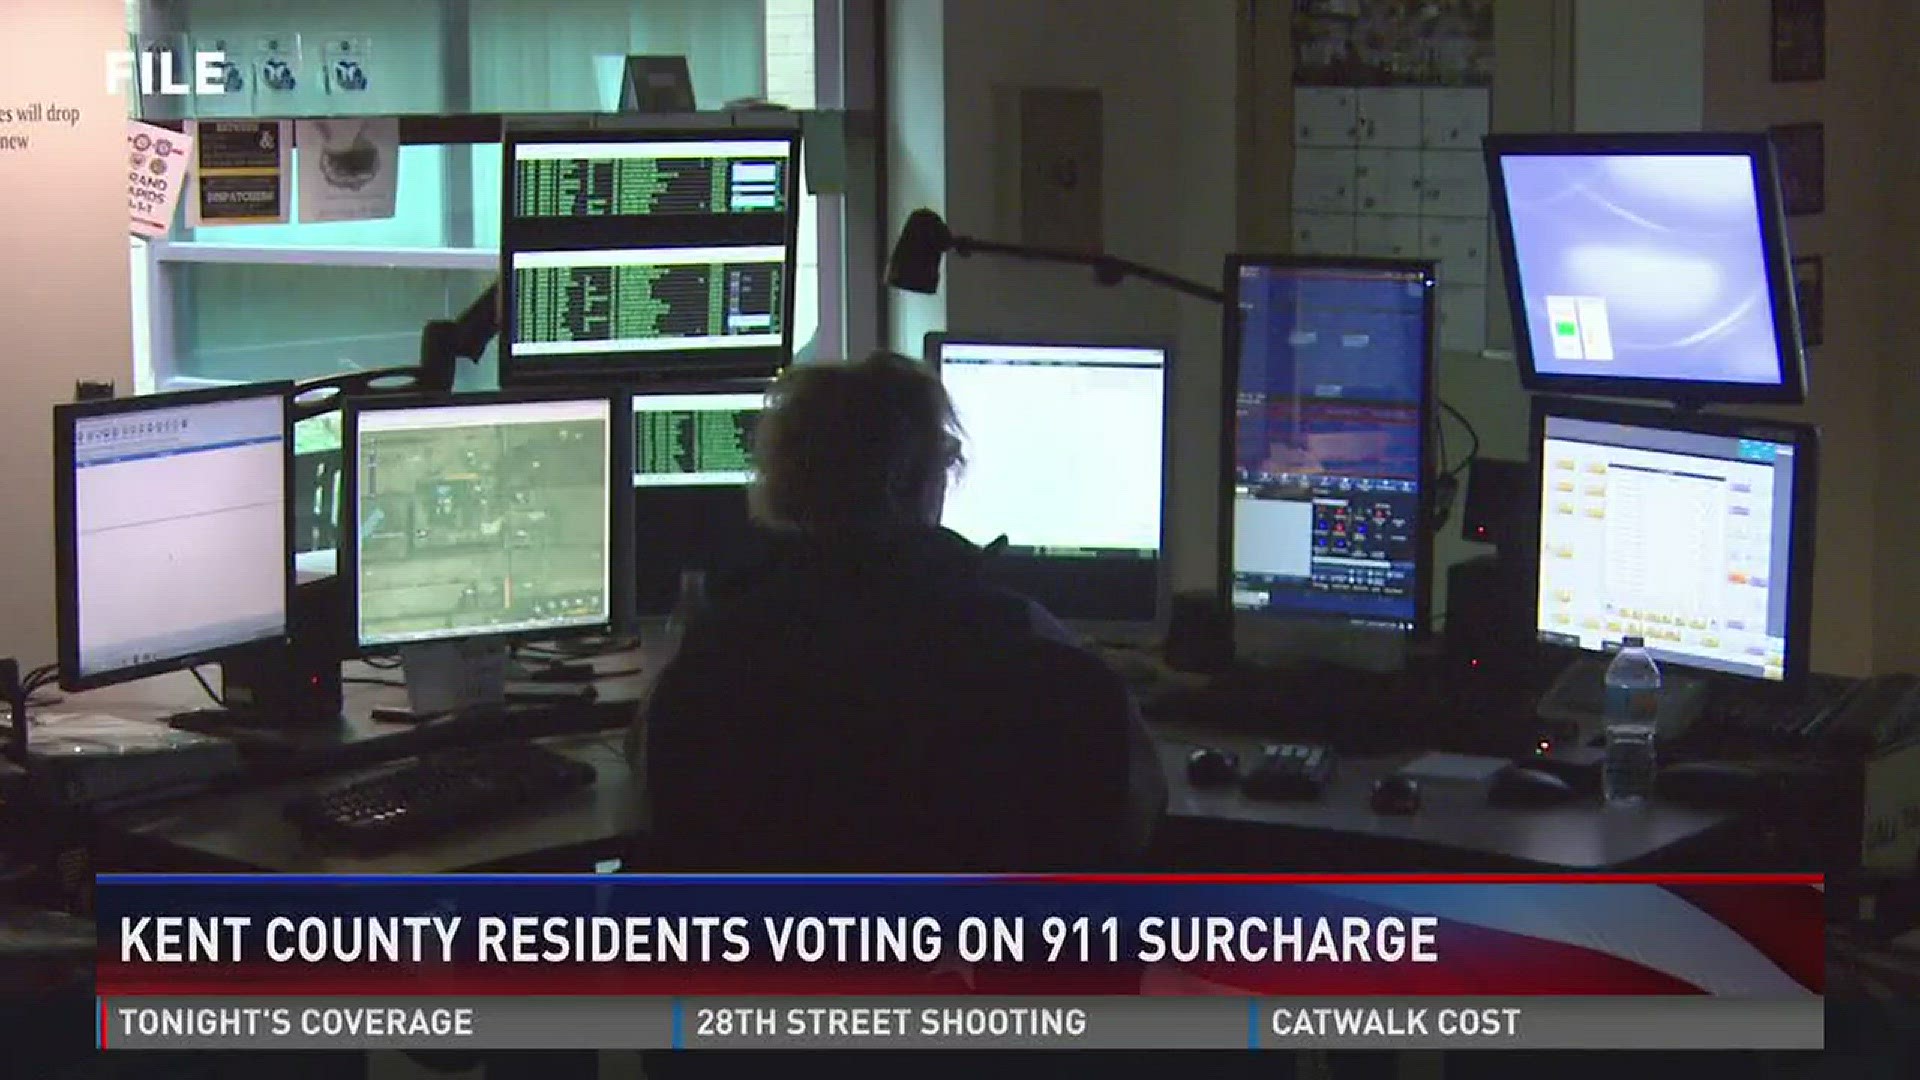 Kent County Residents voting on 911 surcharge